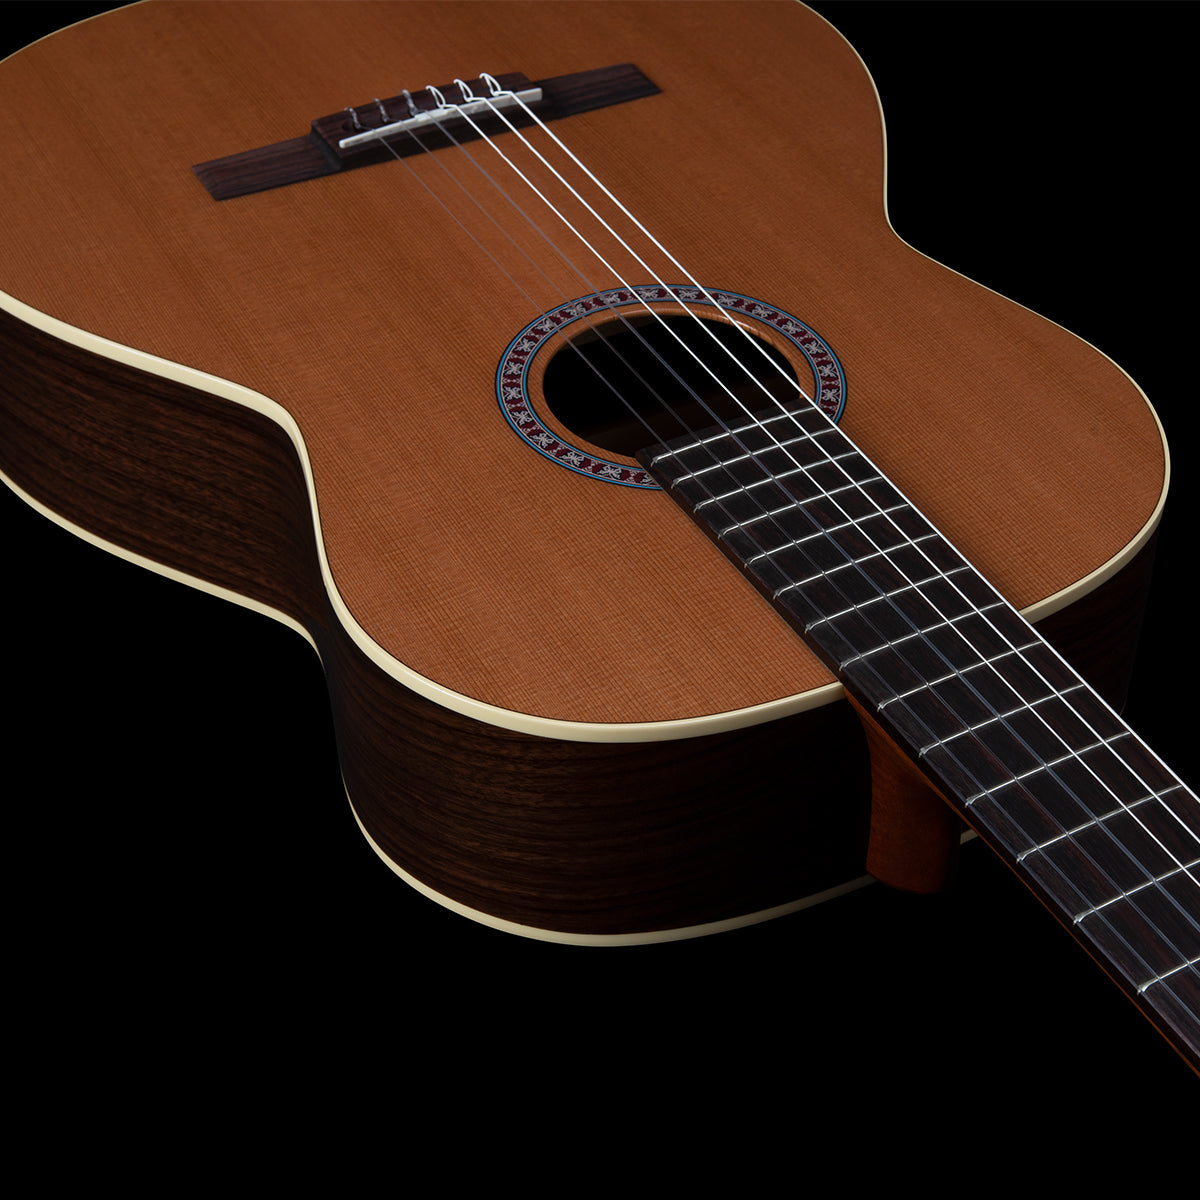 Godin Collection Nylon String Guitar, Acoustic Guitar for sale at Richards Guitars.